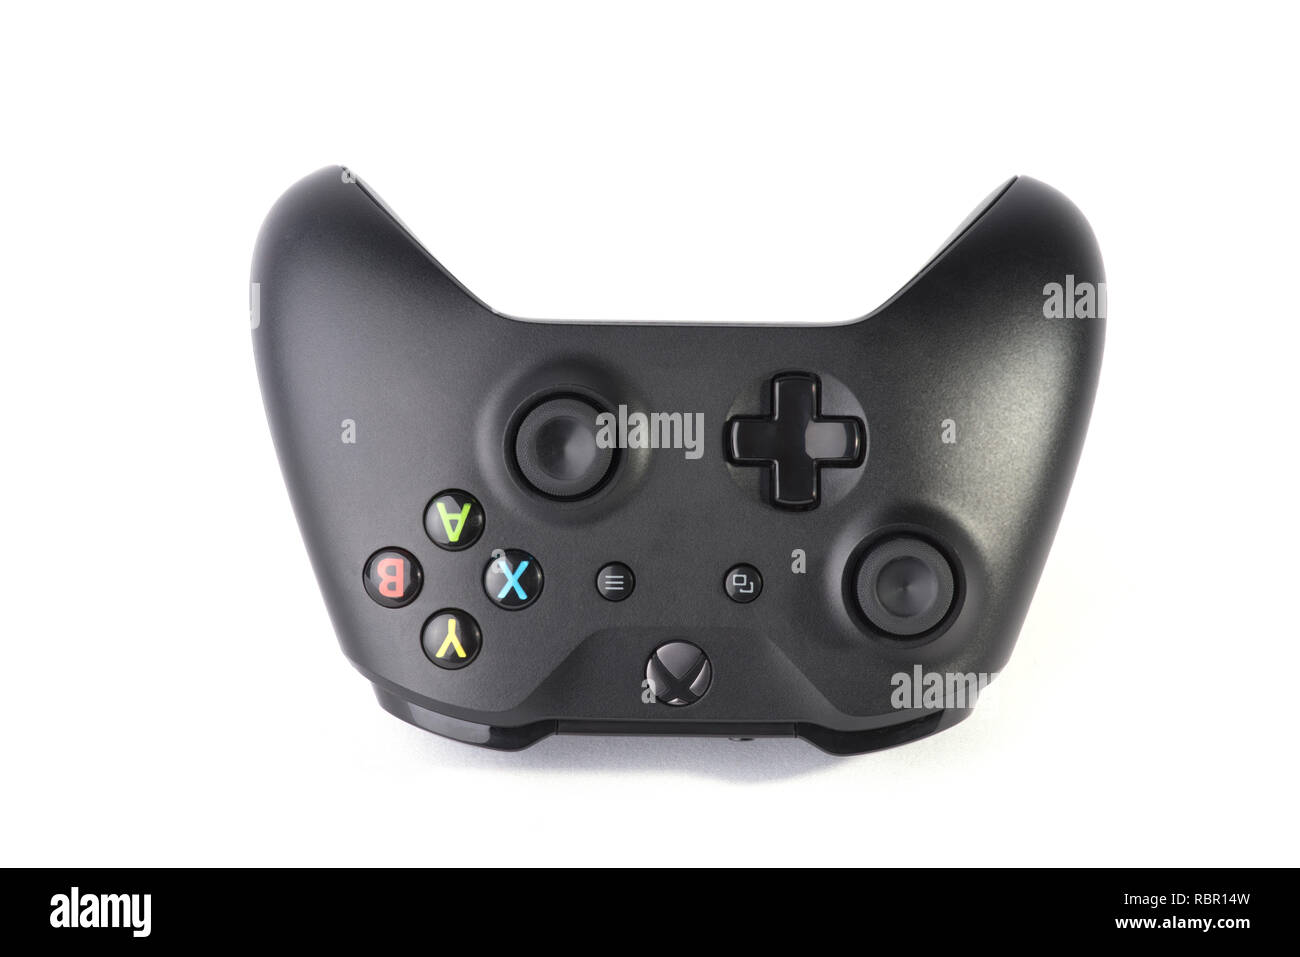 X BOX One X game play station controller isolated on white background. Stock Photo